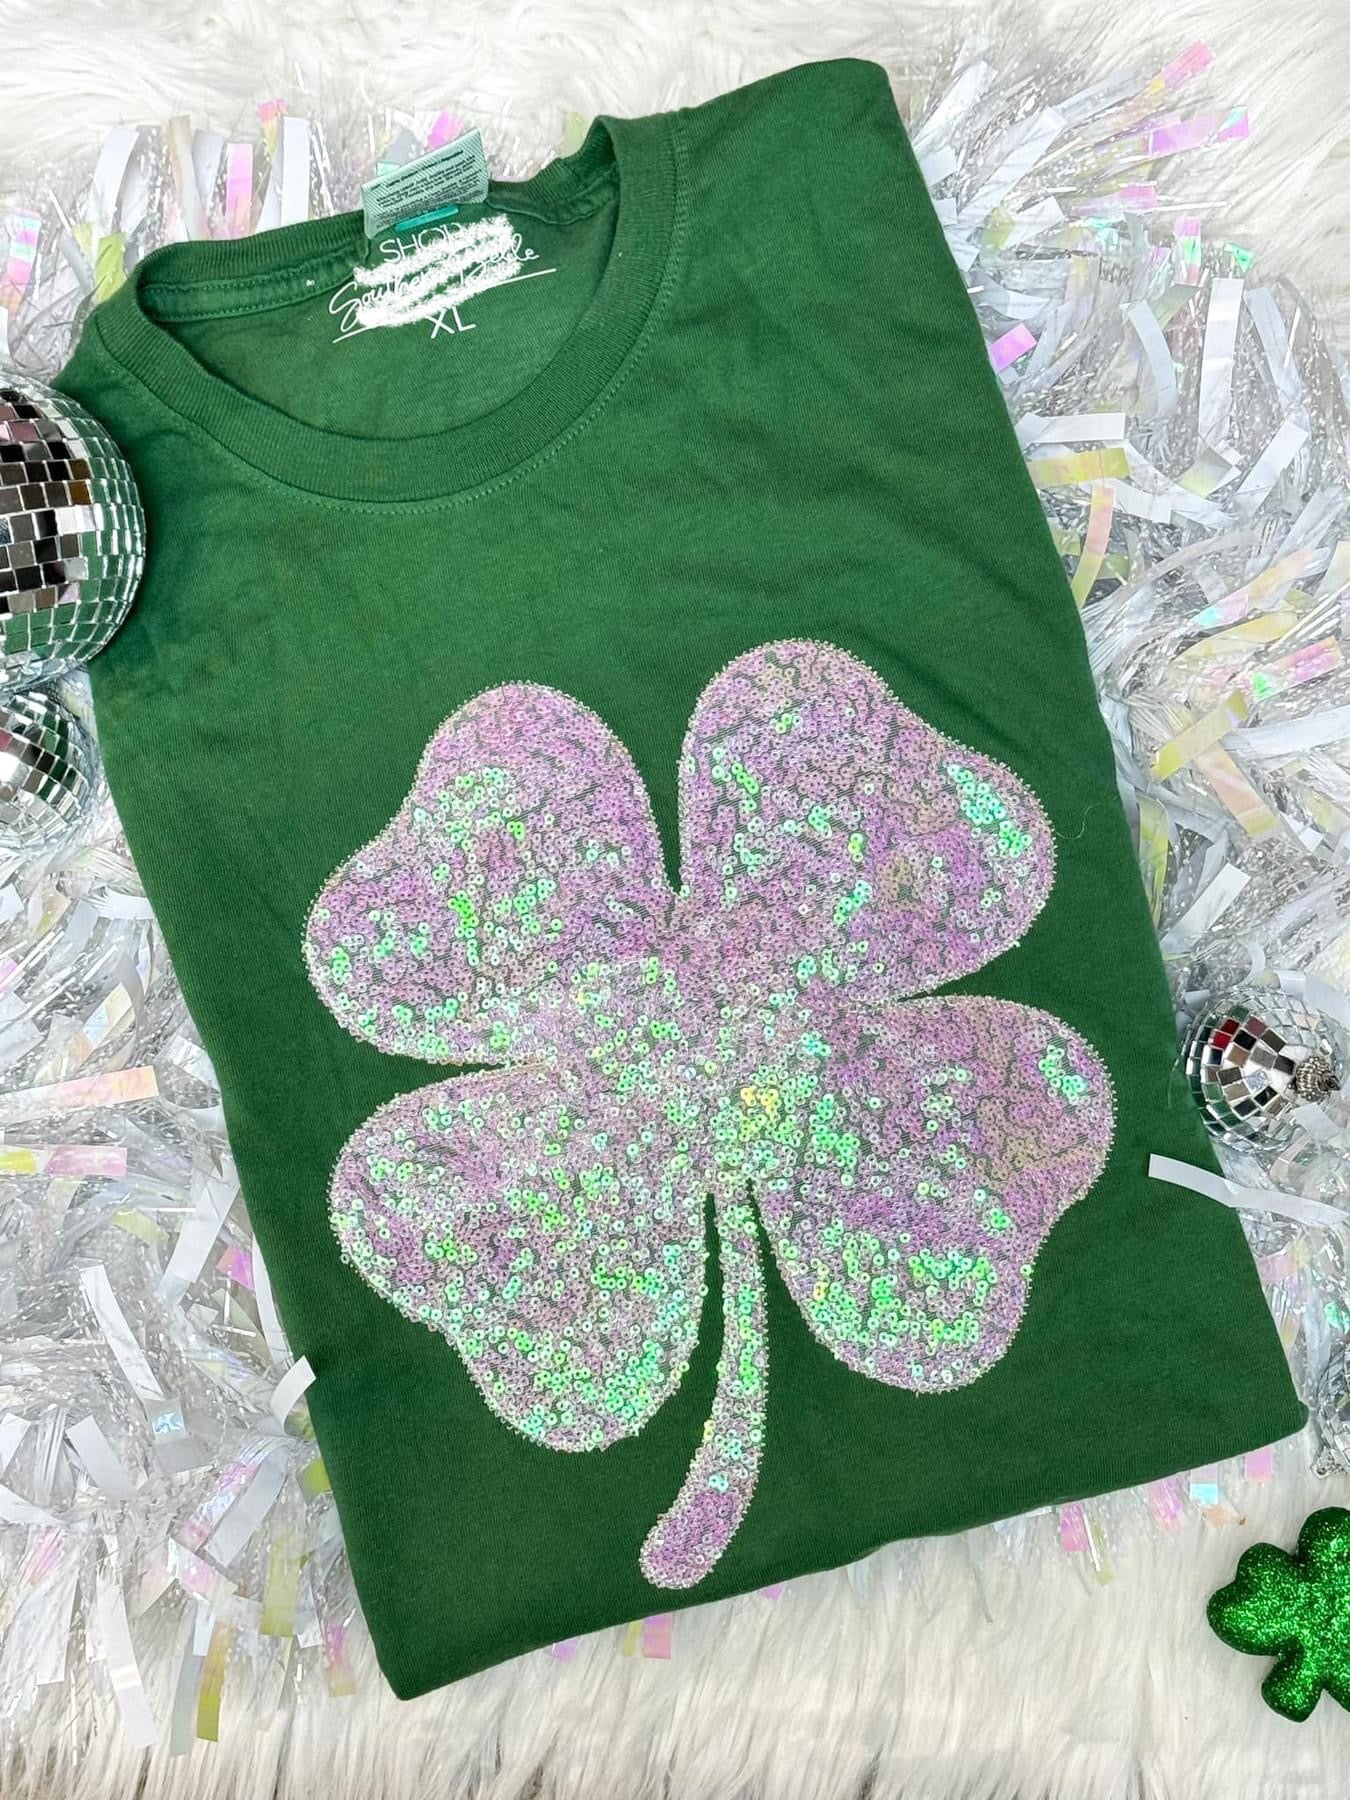 Sequin clover patch